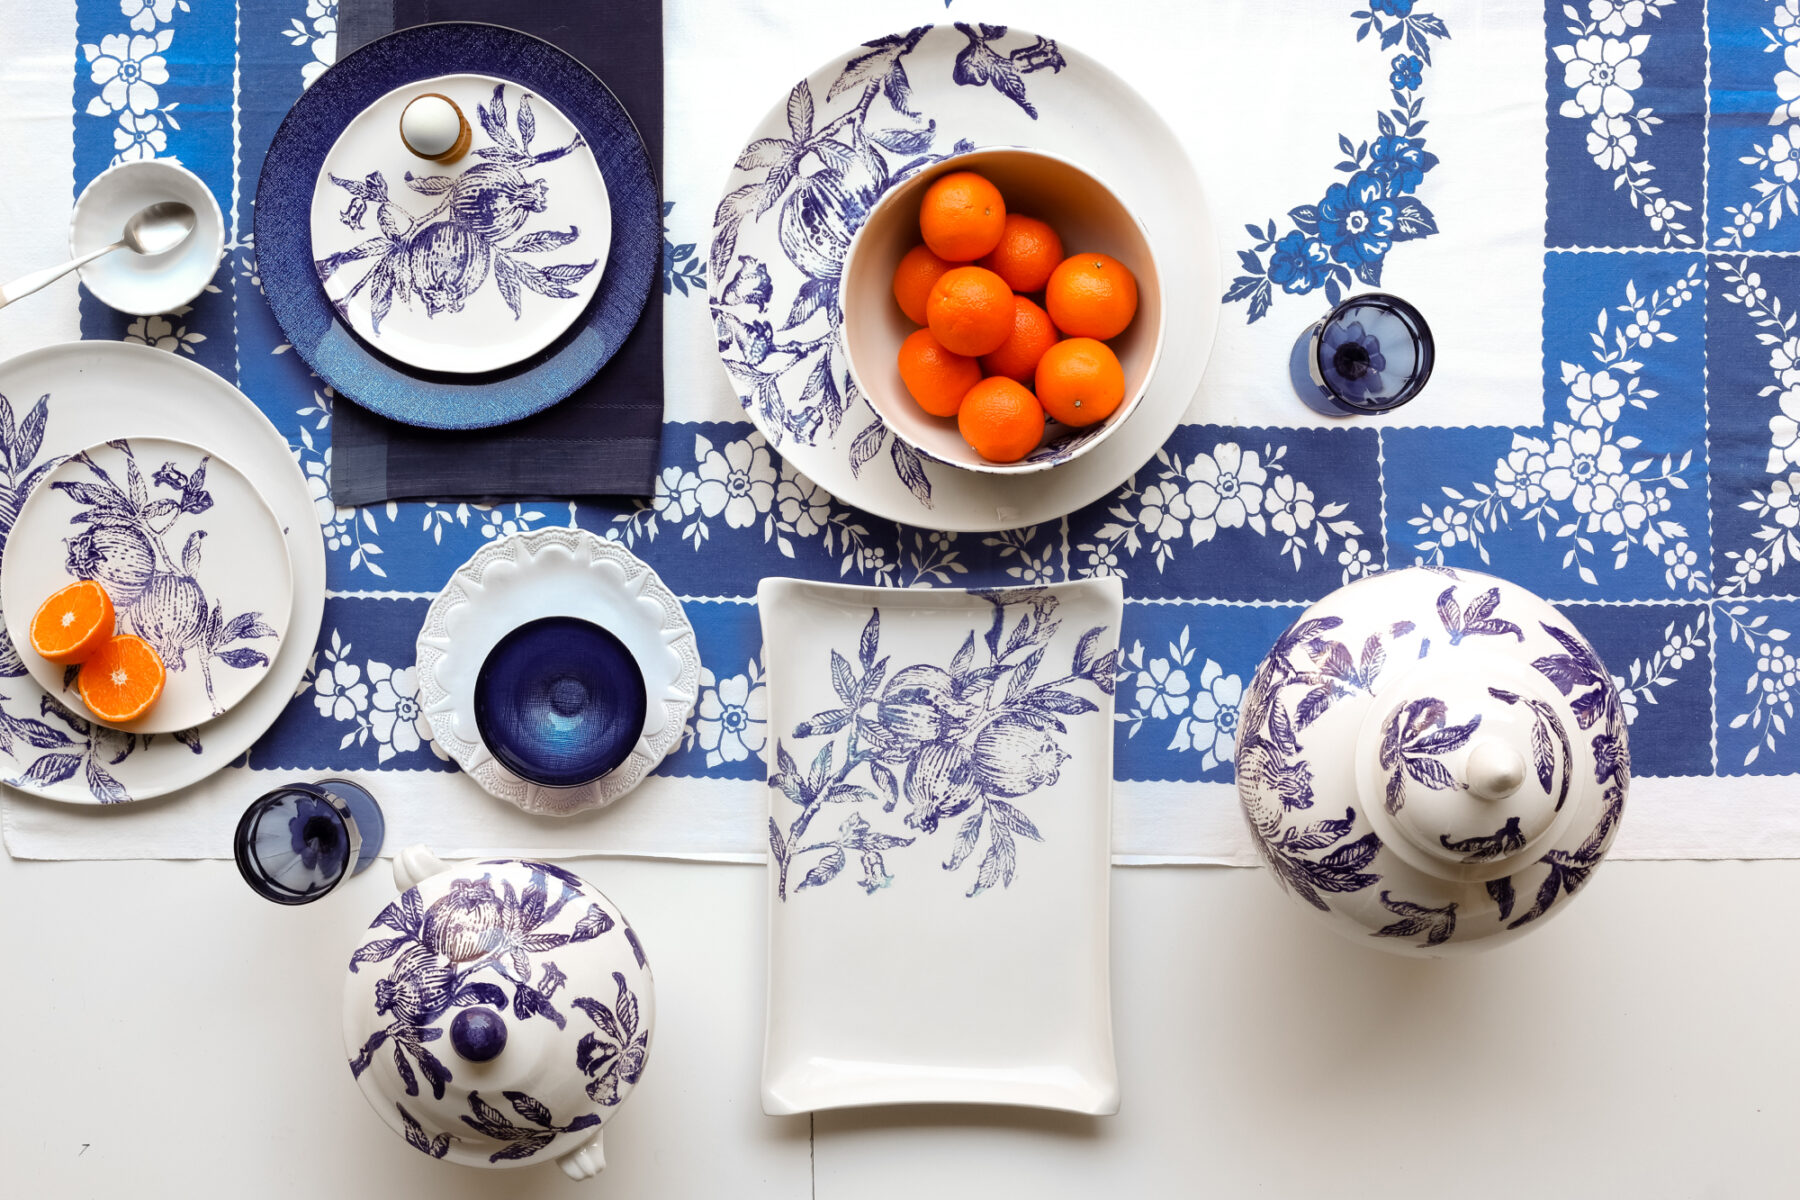 VIETRI - Ornate Blue Leave Dinnerware Set with Oranges as Accent